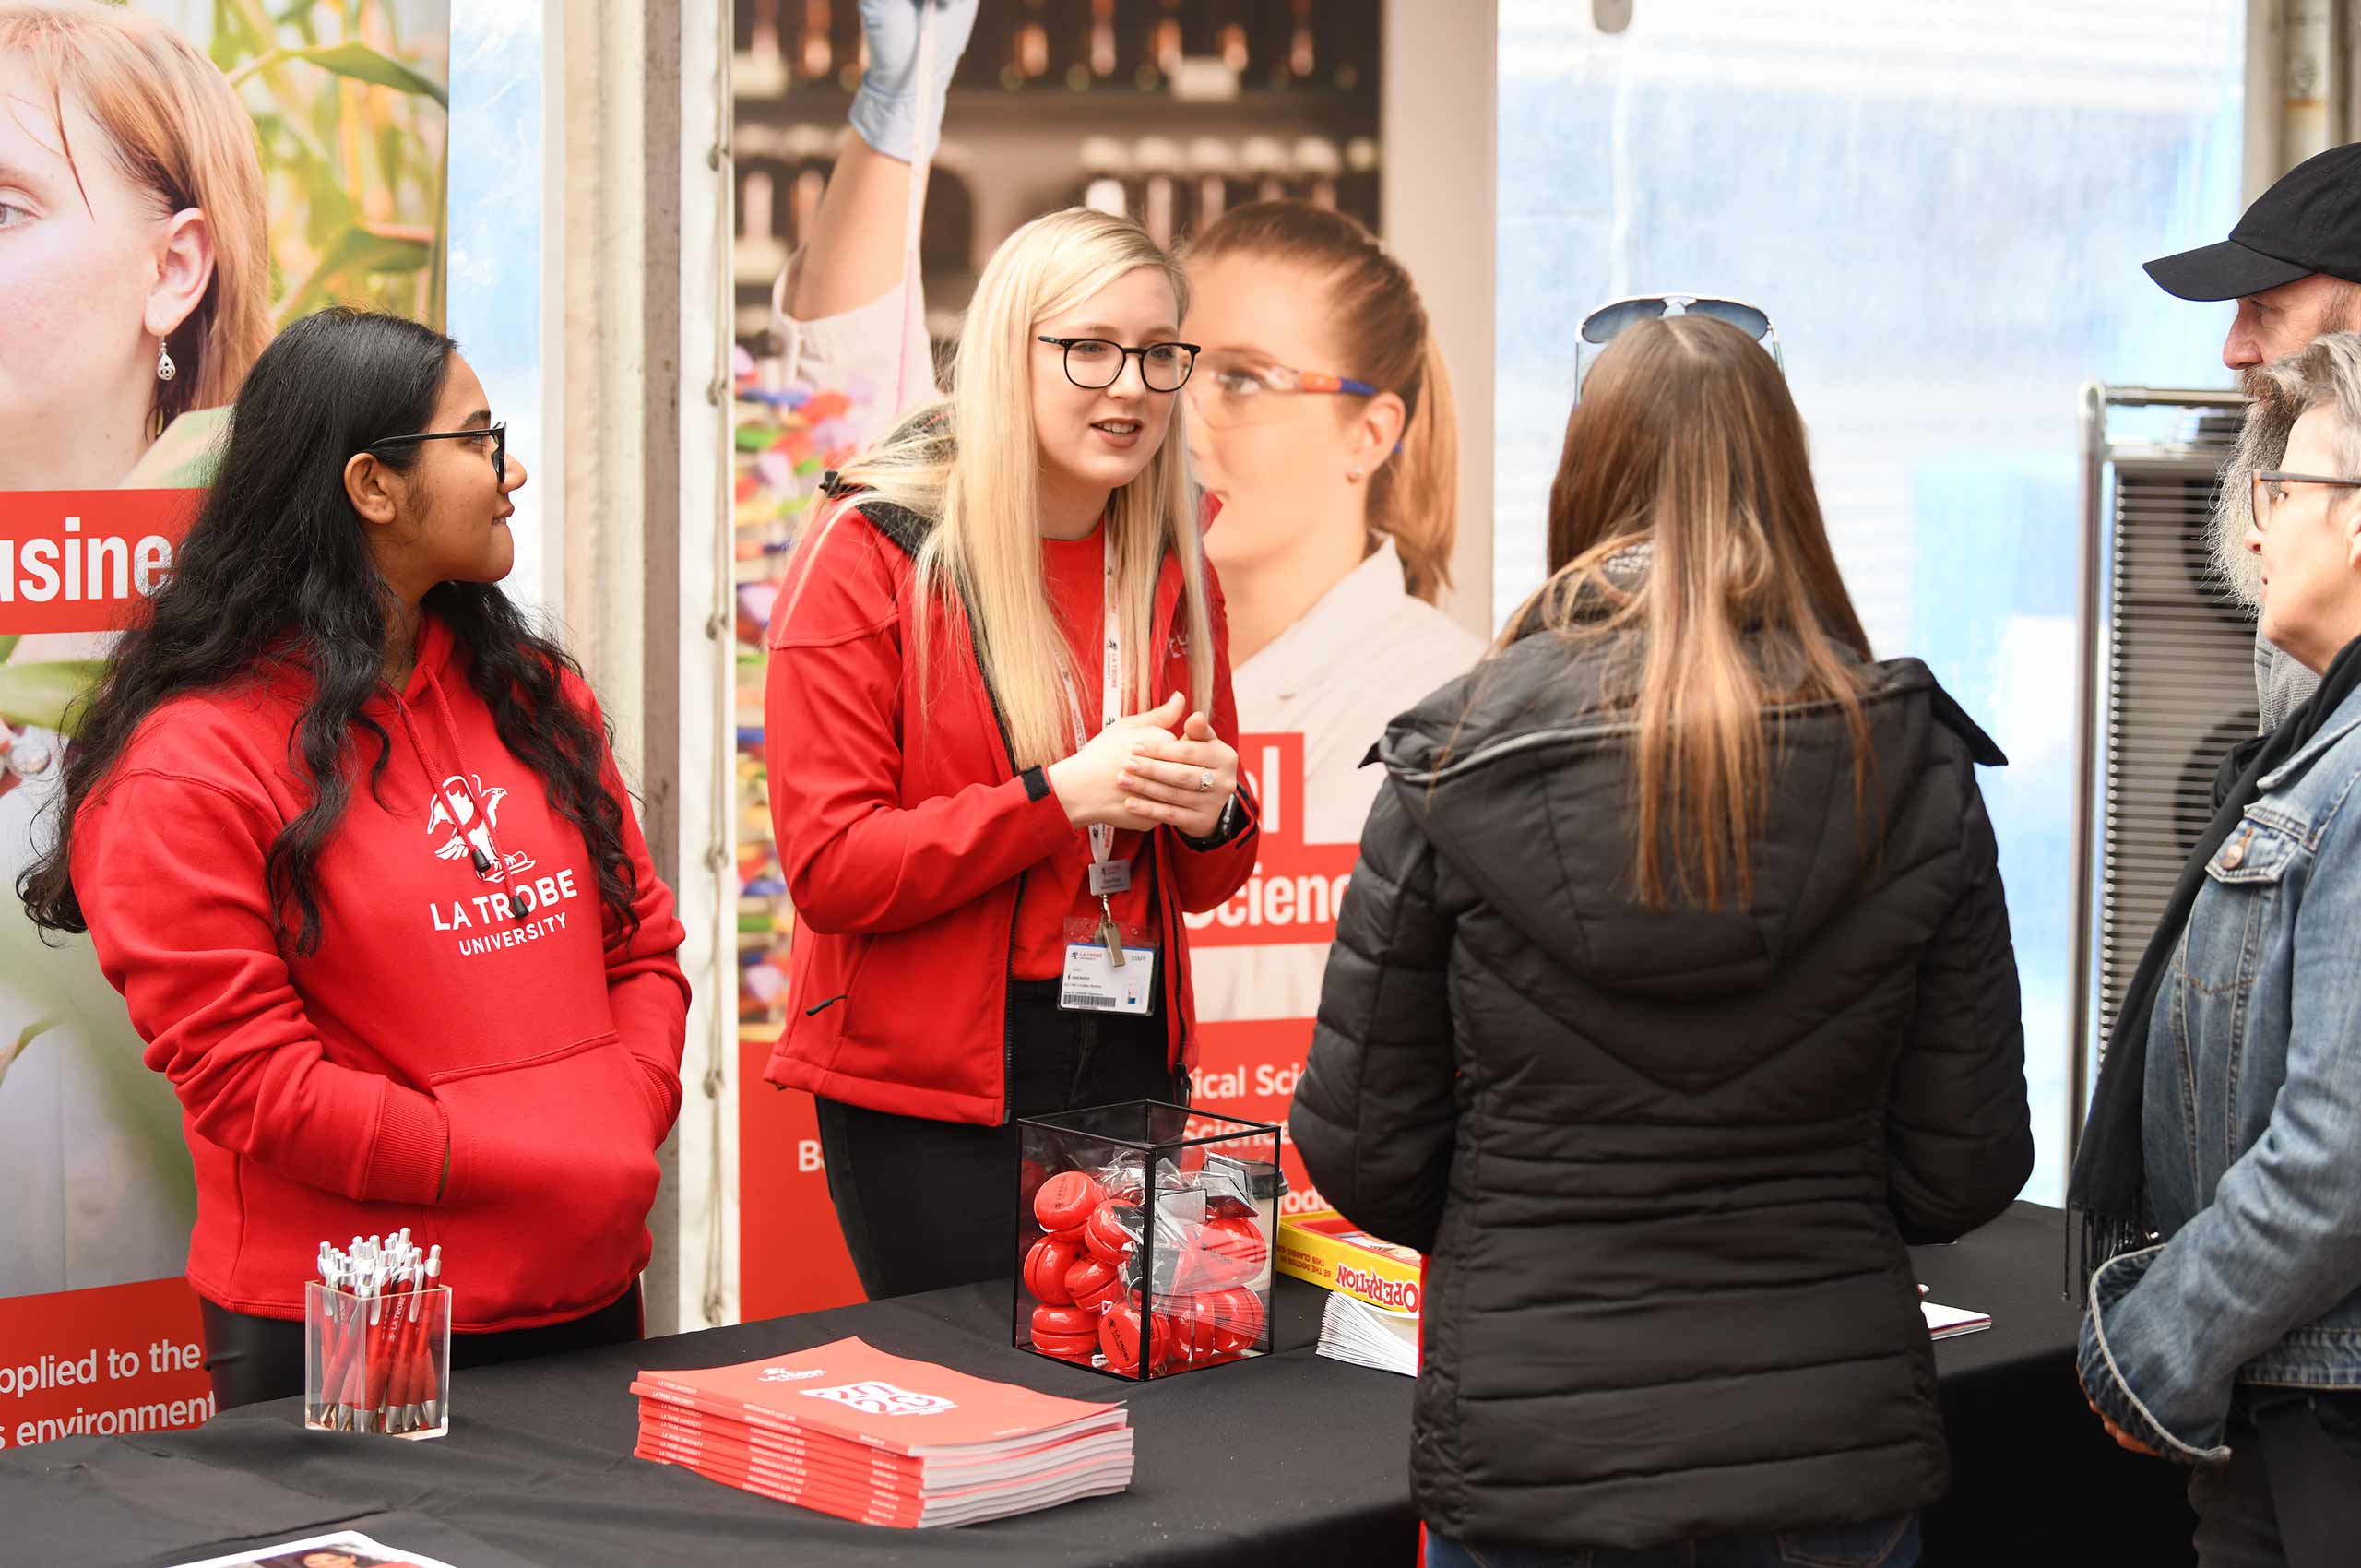 La Trobe staff and prospective students talking at an event.